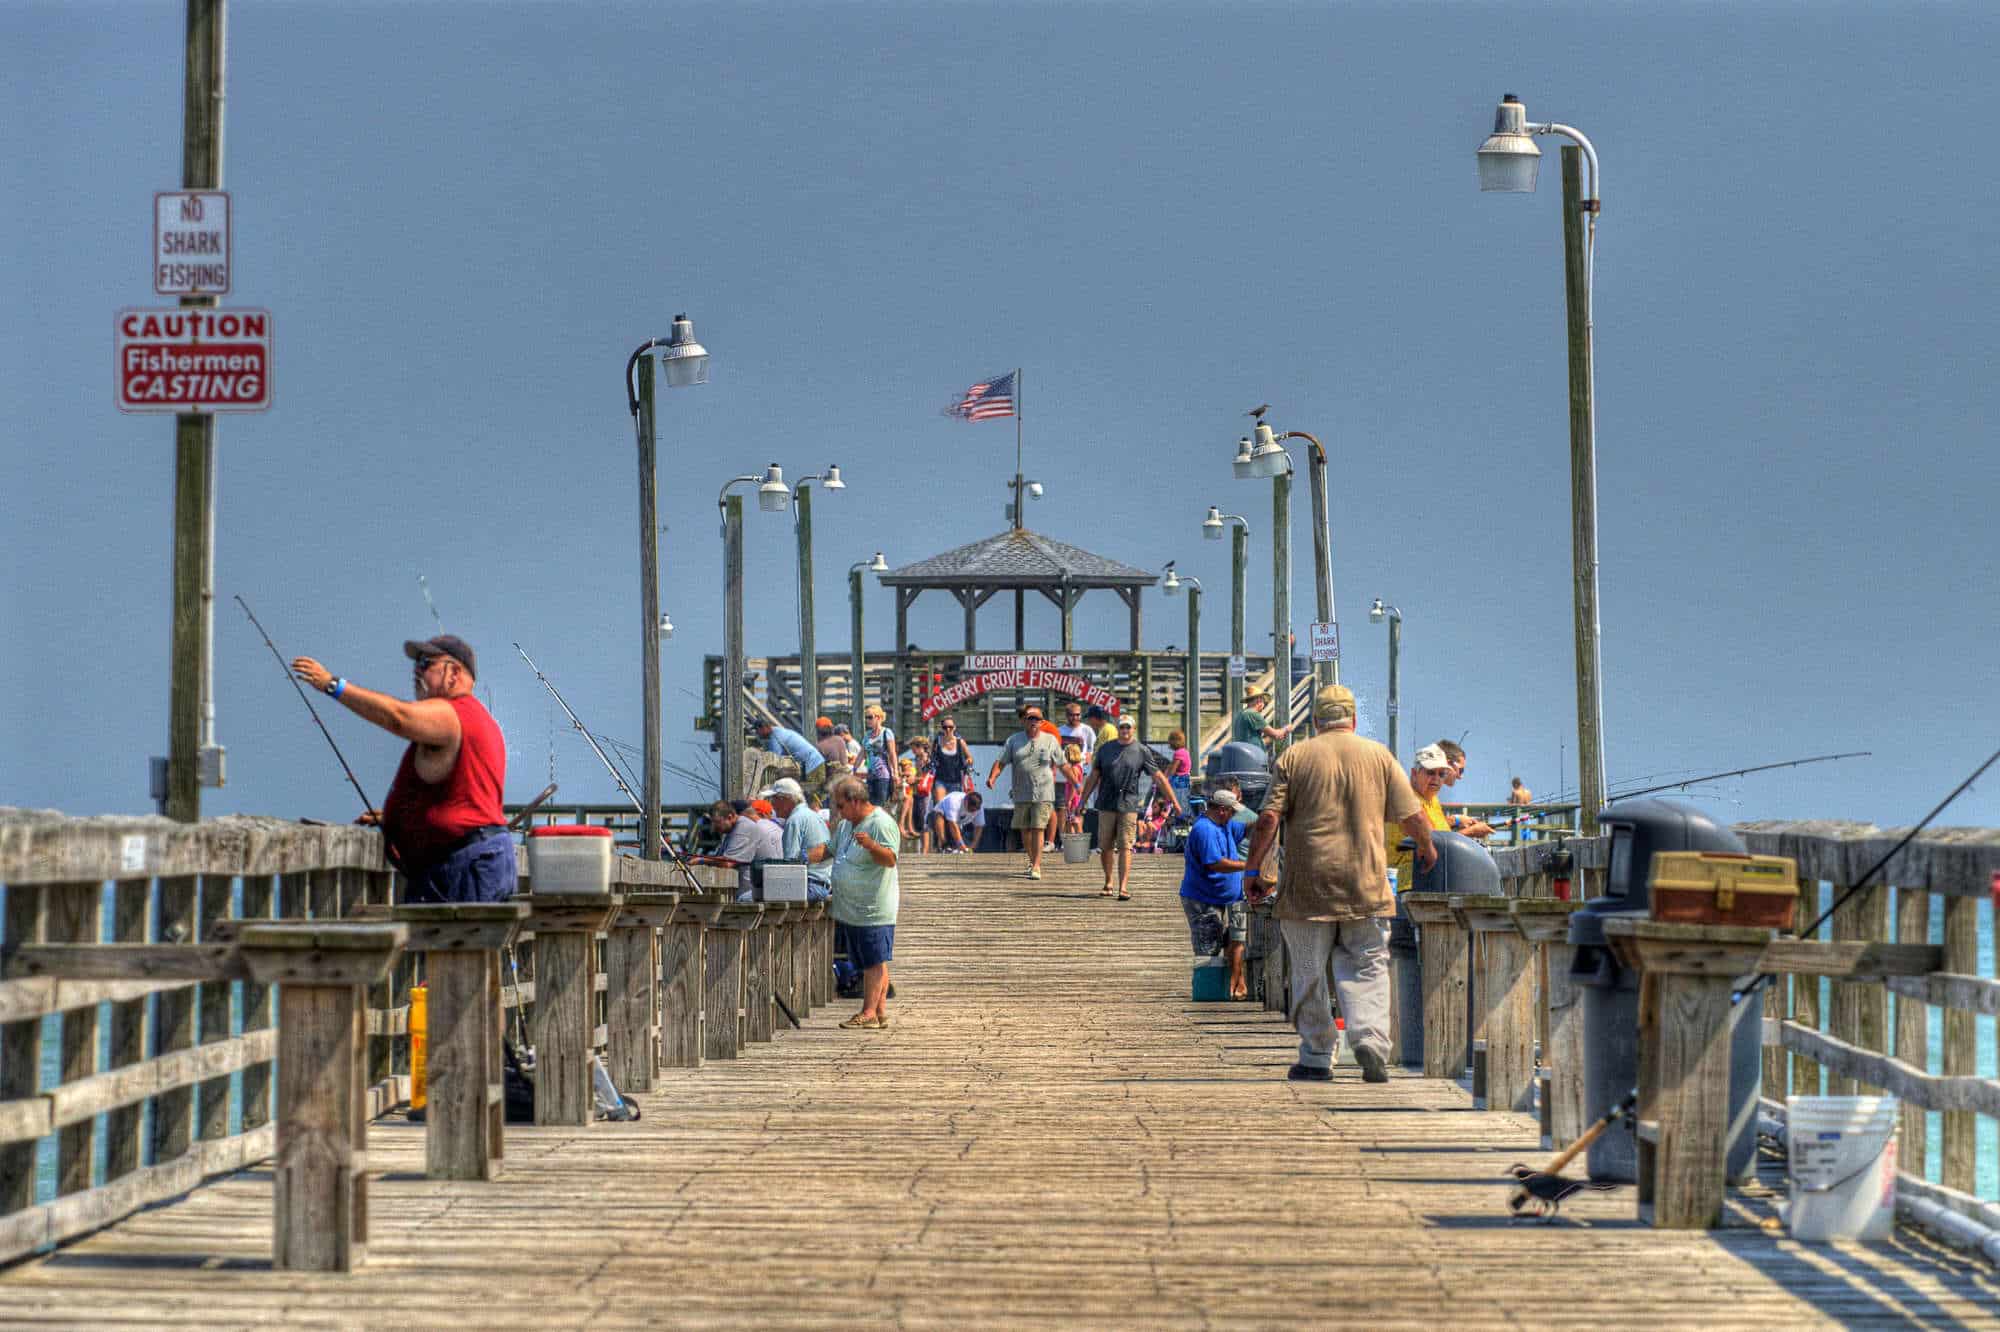 Two-story observation deck at the end of the wooden Cherry Grove Fishing Pier in North Myrtle Beach, South Carolina.